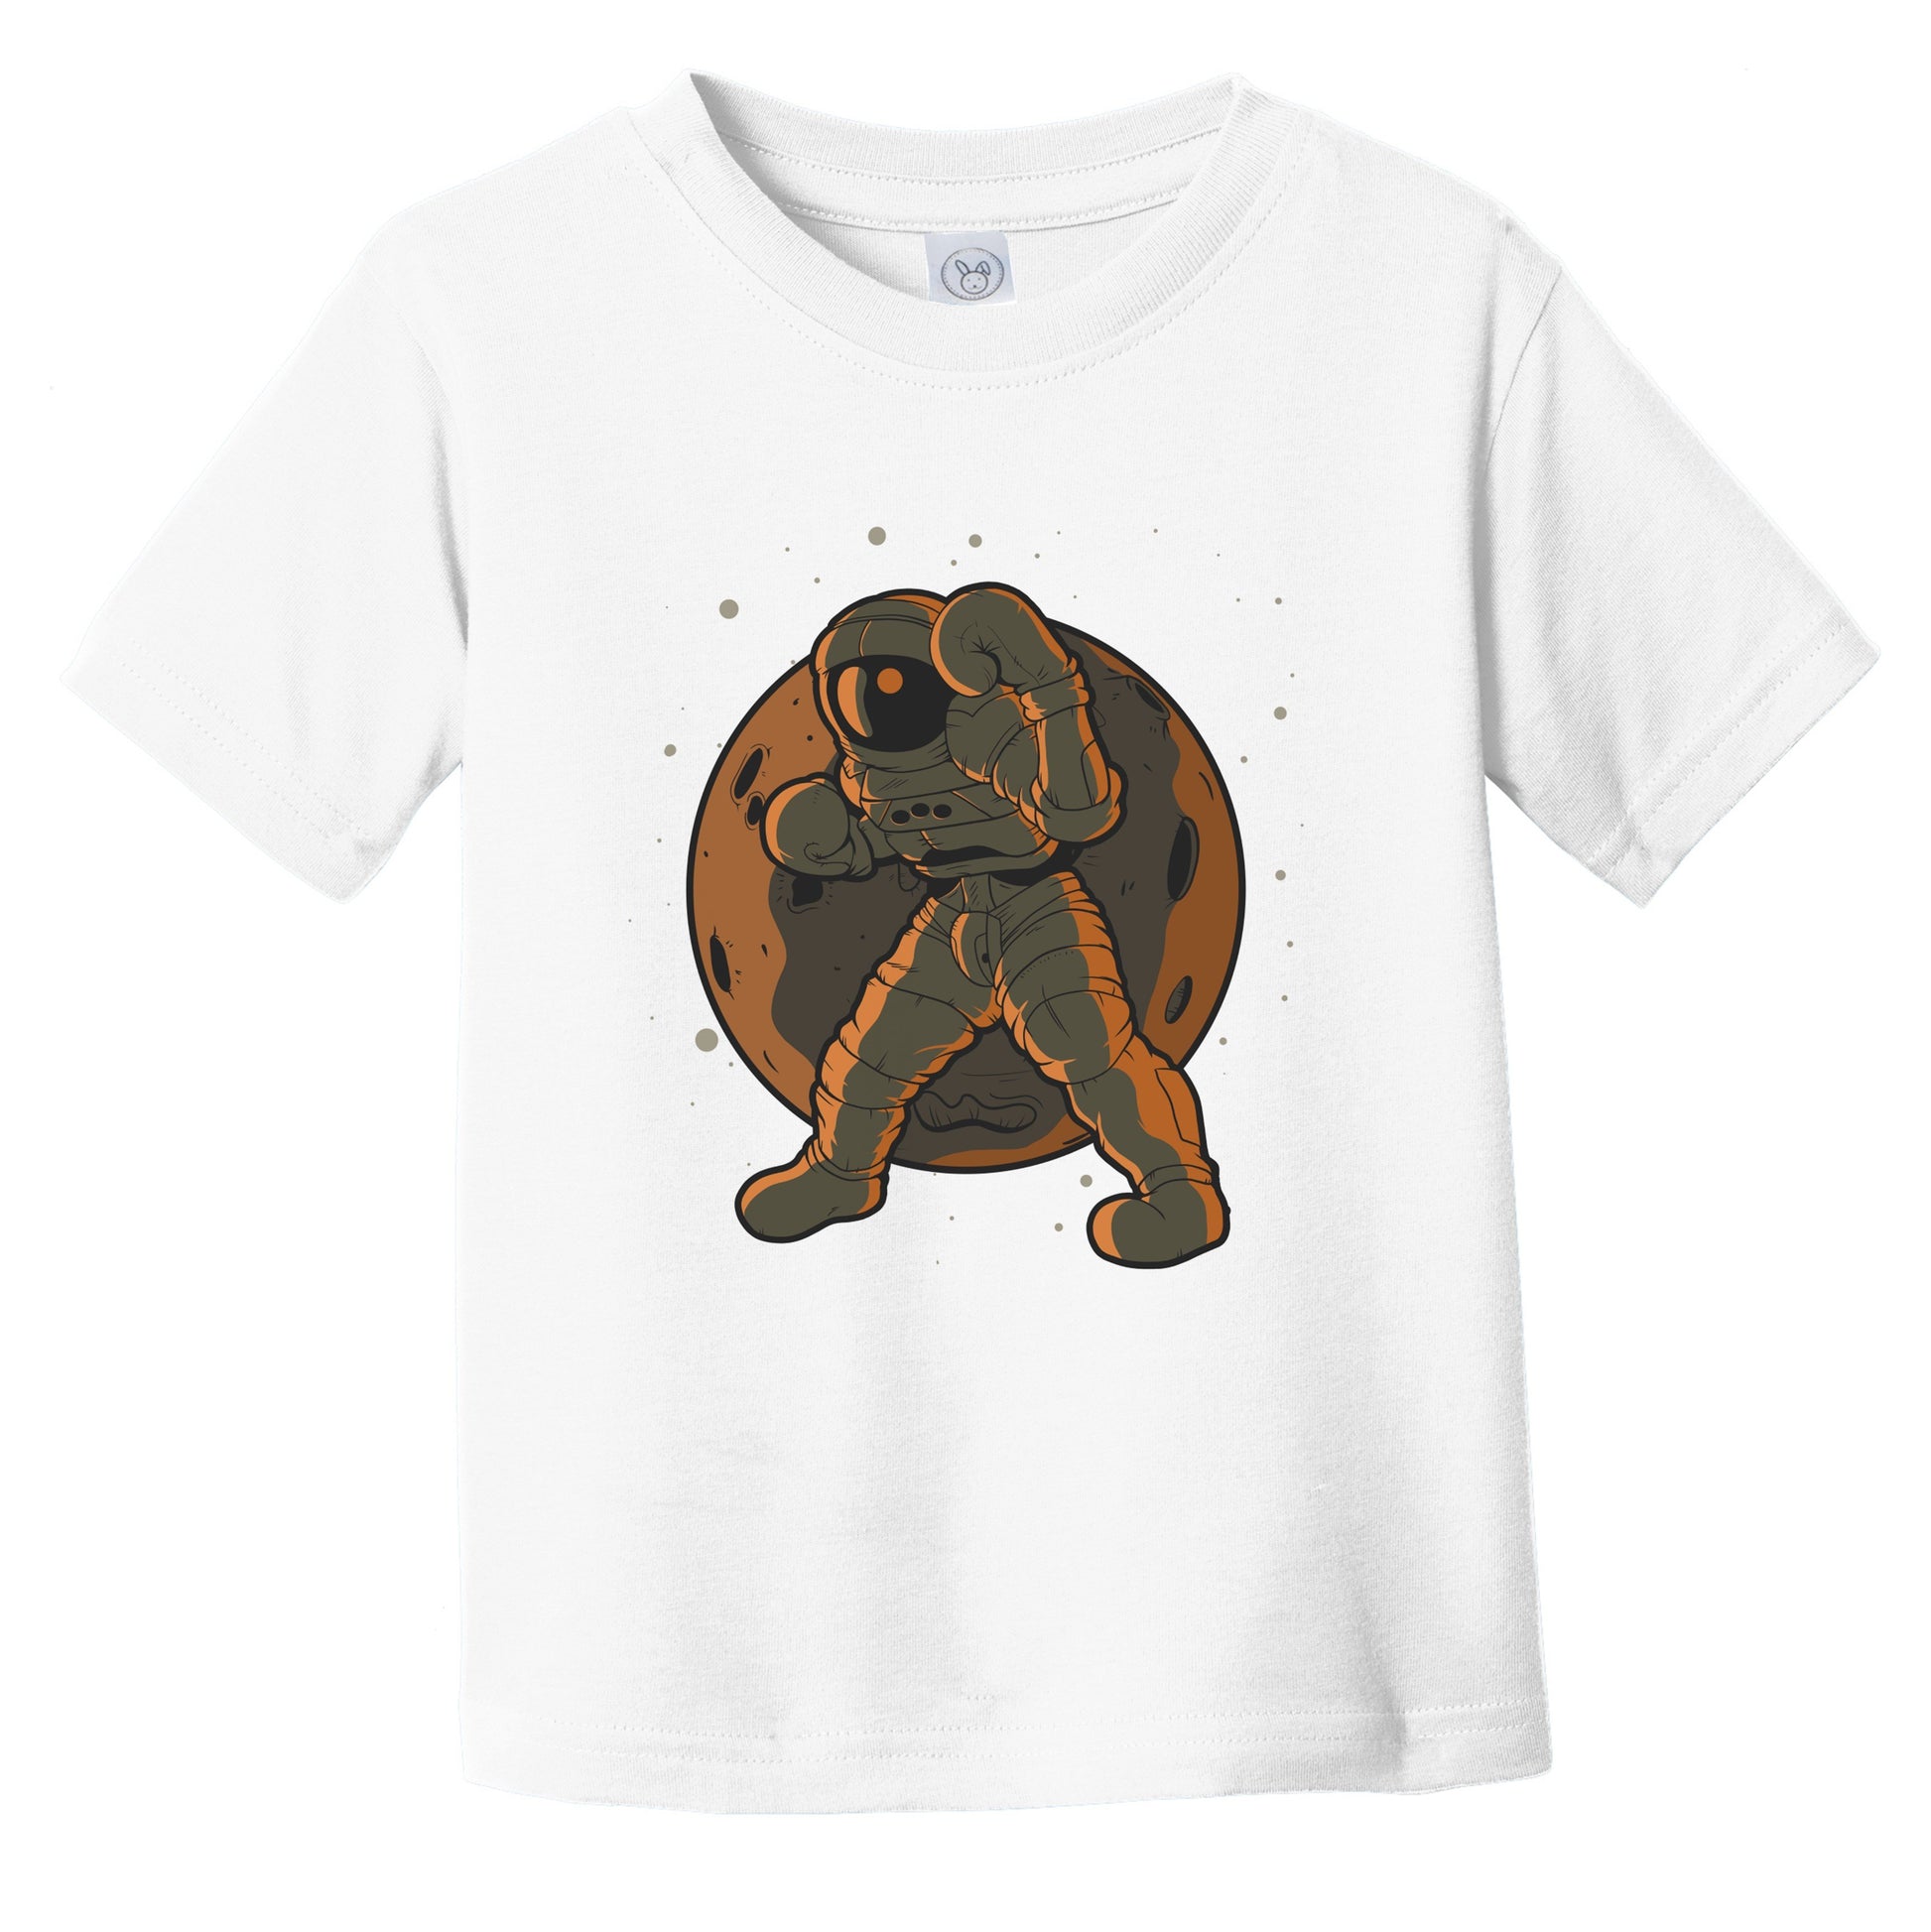 Boxing Toddler Shirt - Astronaut Outer Space Spaceman Boxer Infant Toddler T-Shirt